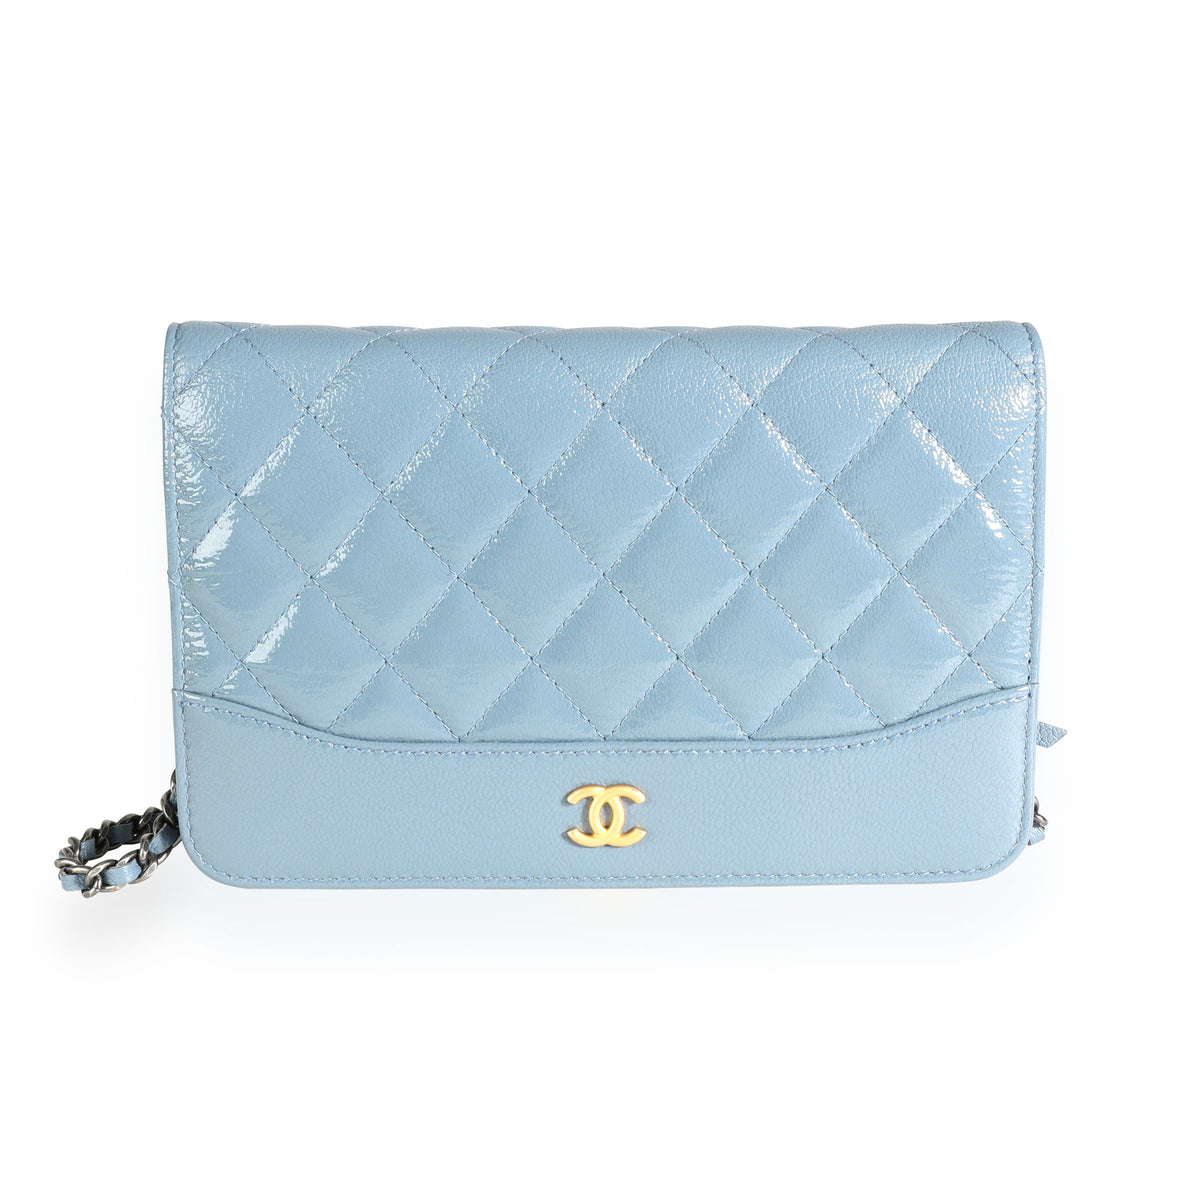 Chanel Blue Quilted Ombré Patent & Aged Calfskin Gabrielle Wallet on Chain, myGemma